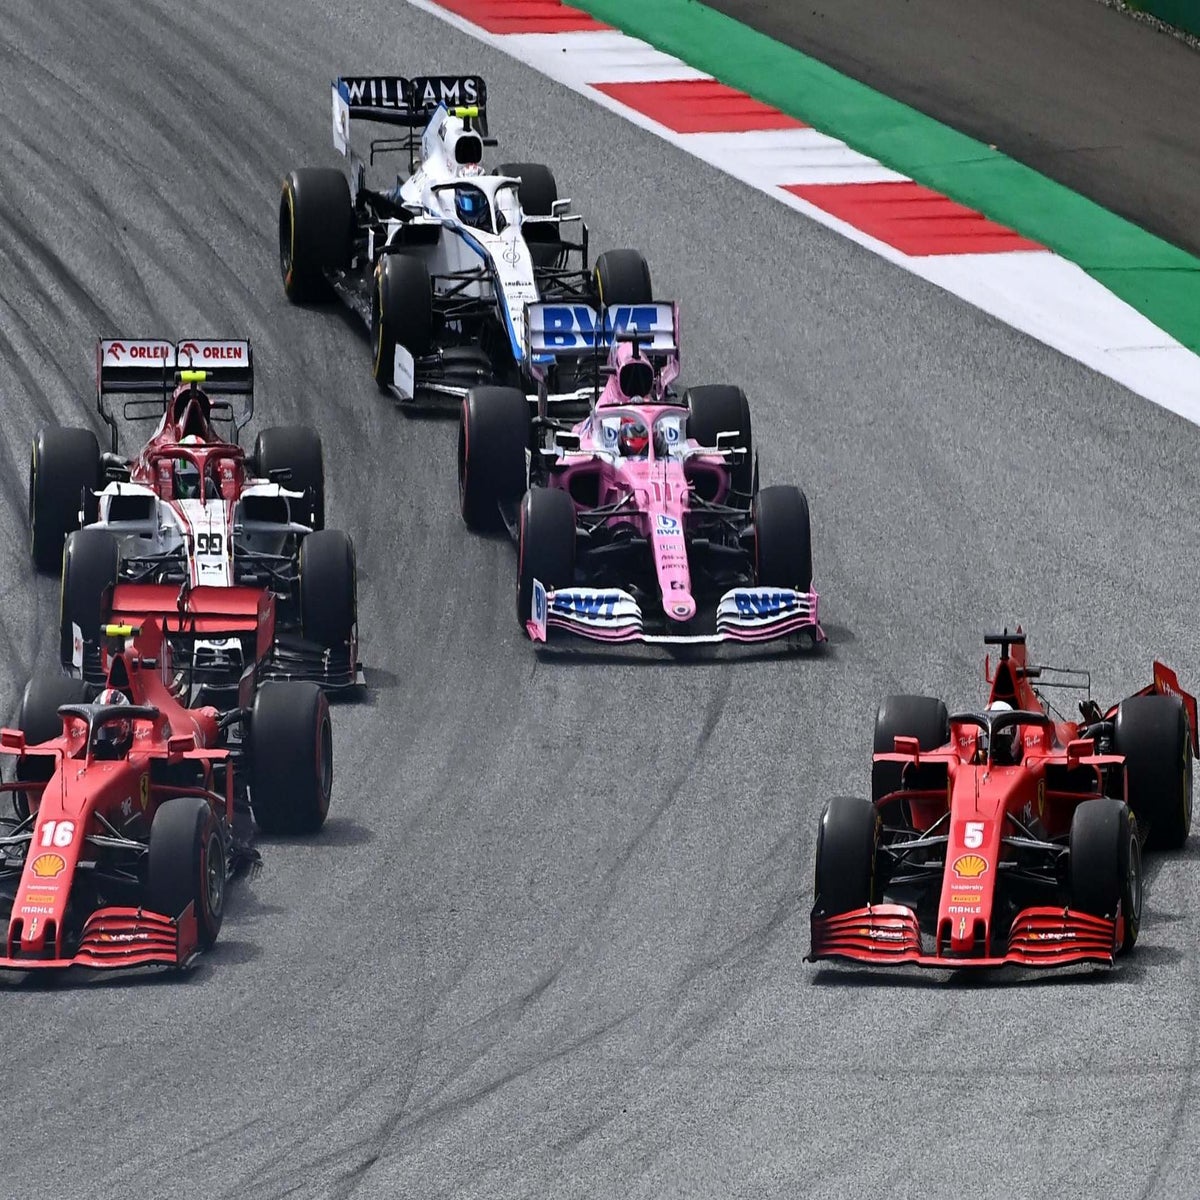 Was Monza 2020 the best race of F1's hybrid era? Our verdict - The